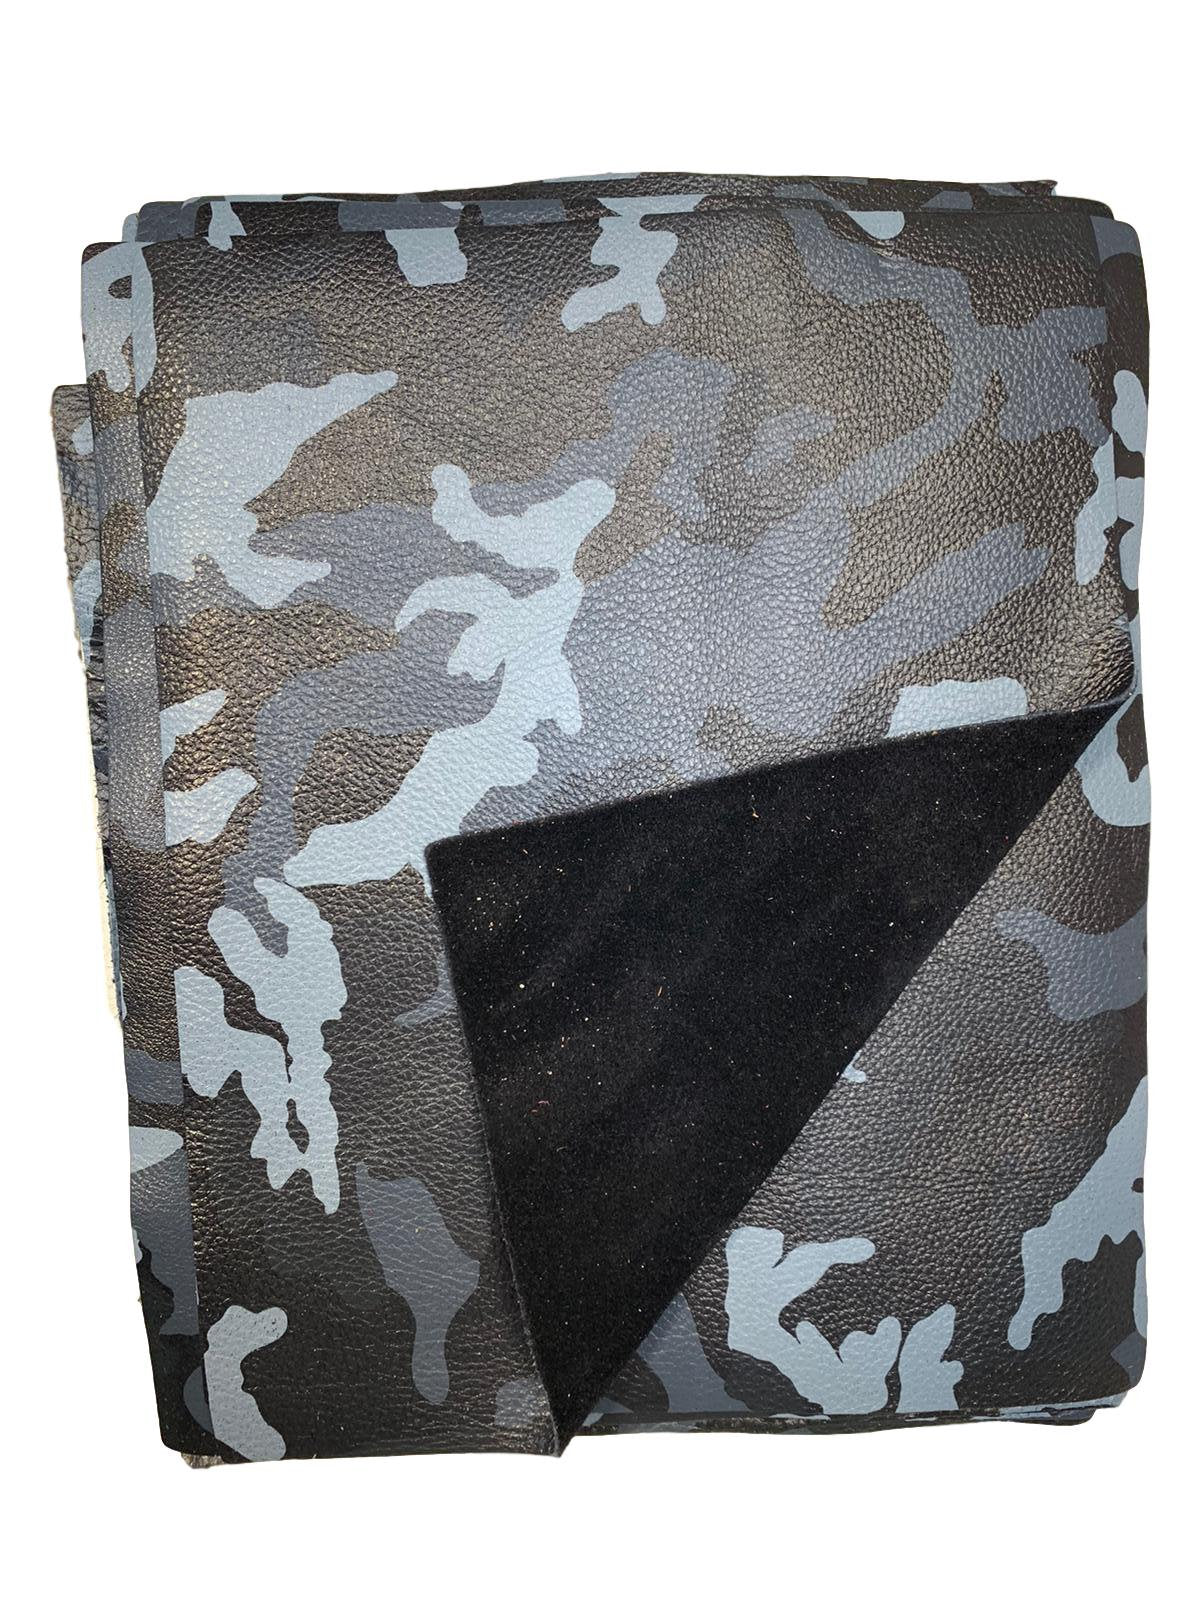 Navy Camouflage Cow Leather: 8.5" x 11" Pre-Cut Pieces